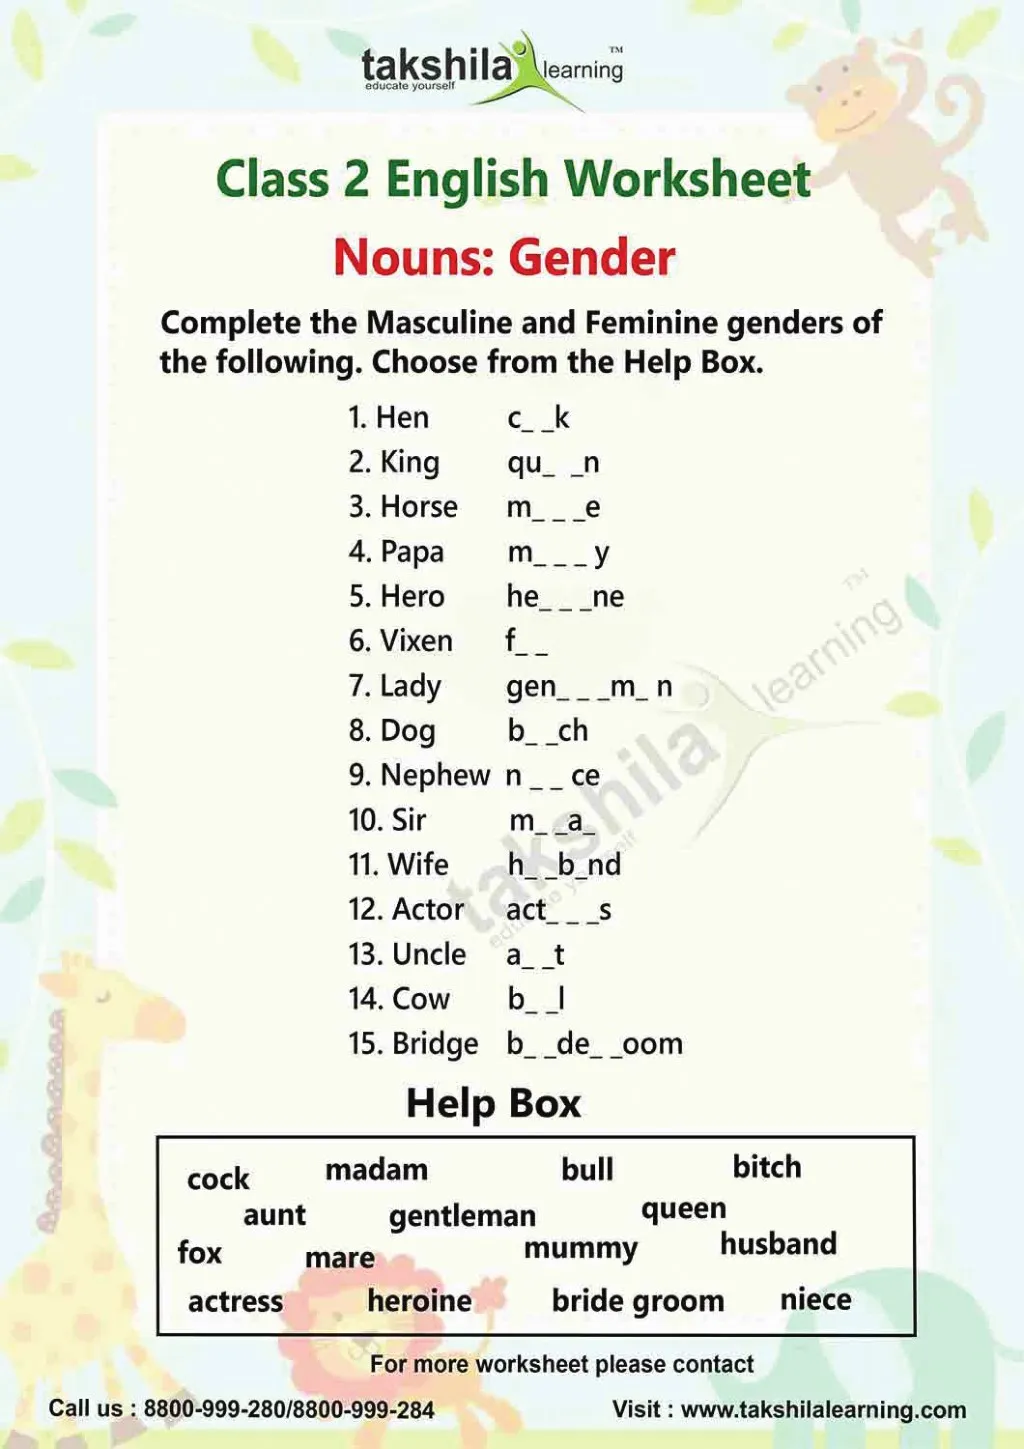 ppt-download-worksheets-for-class-2-english-nouns-gender-takshilalearning-powerpoint